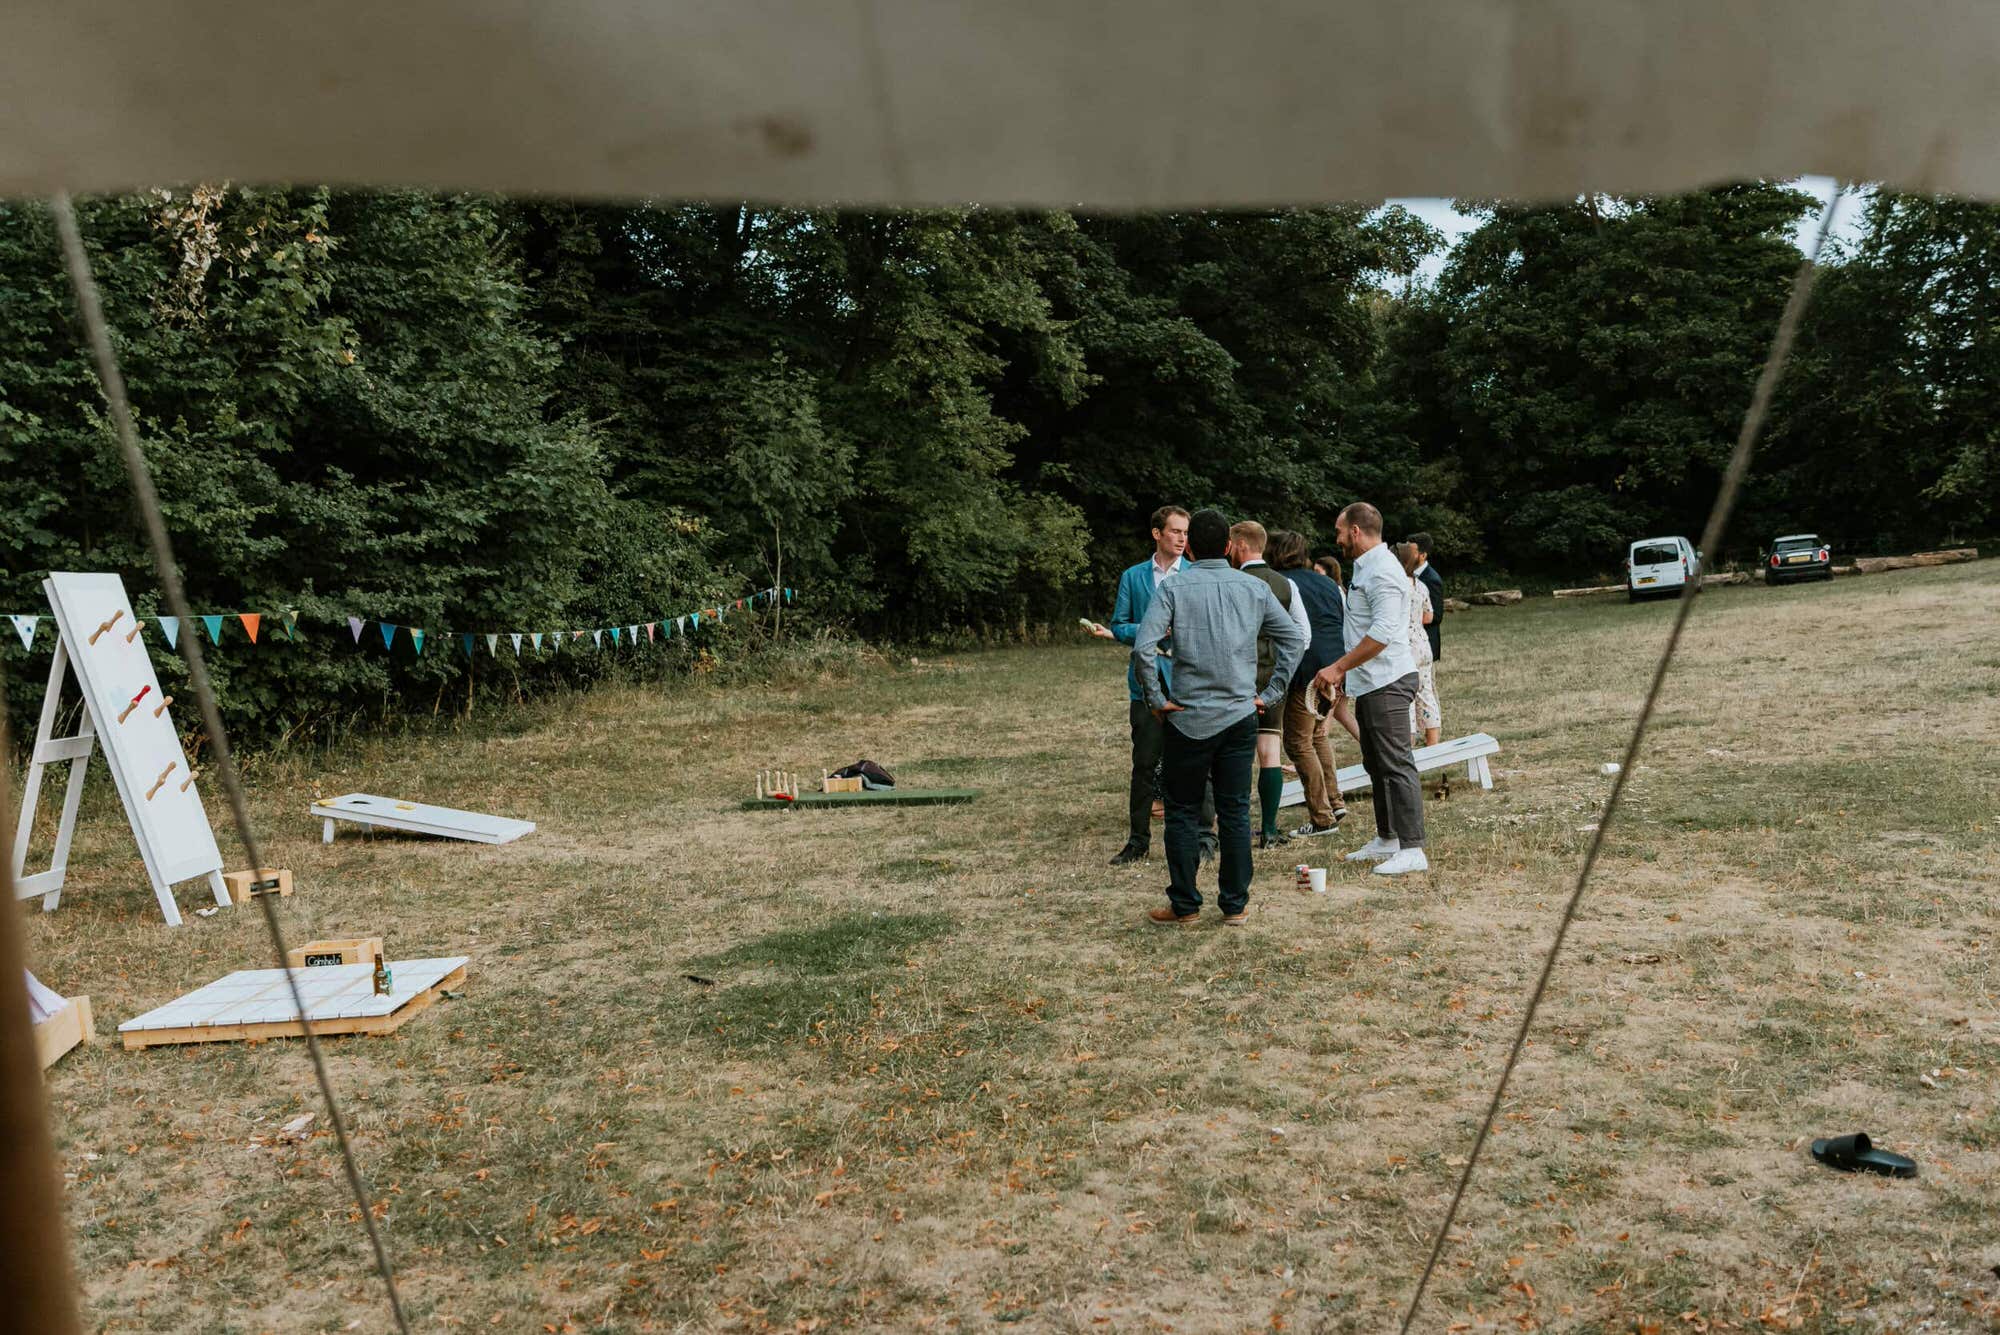 lawn games played by the guest in the wedding